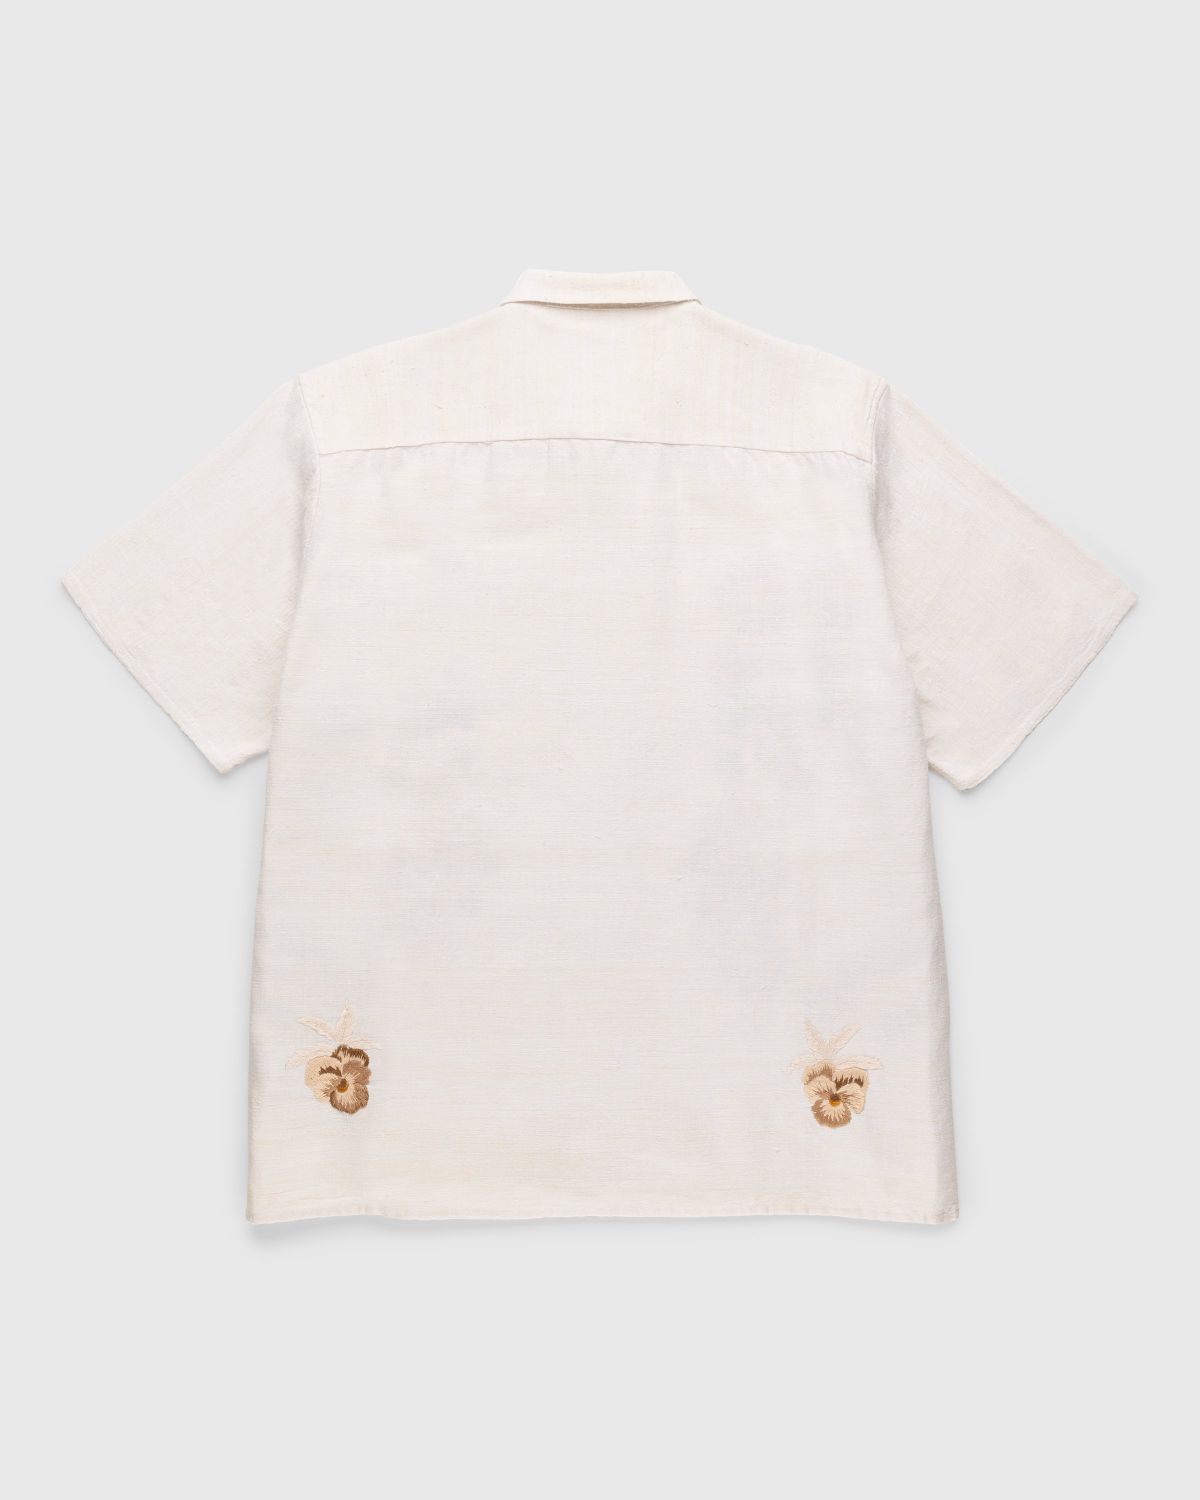 Diomene by Damir Doma – Embroidered Vacation Shirt Cream - Shirts - White - Image 2